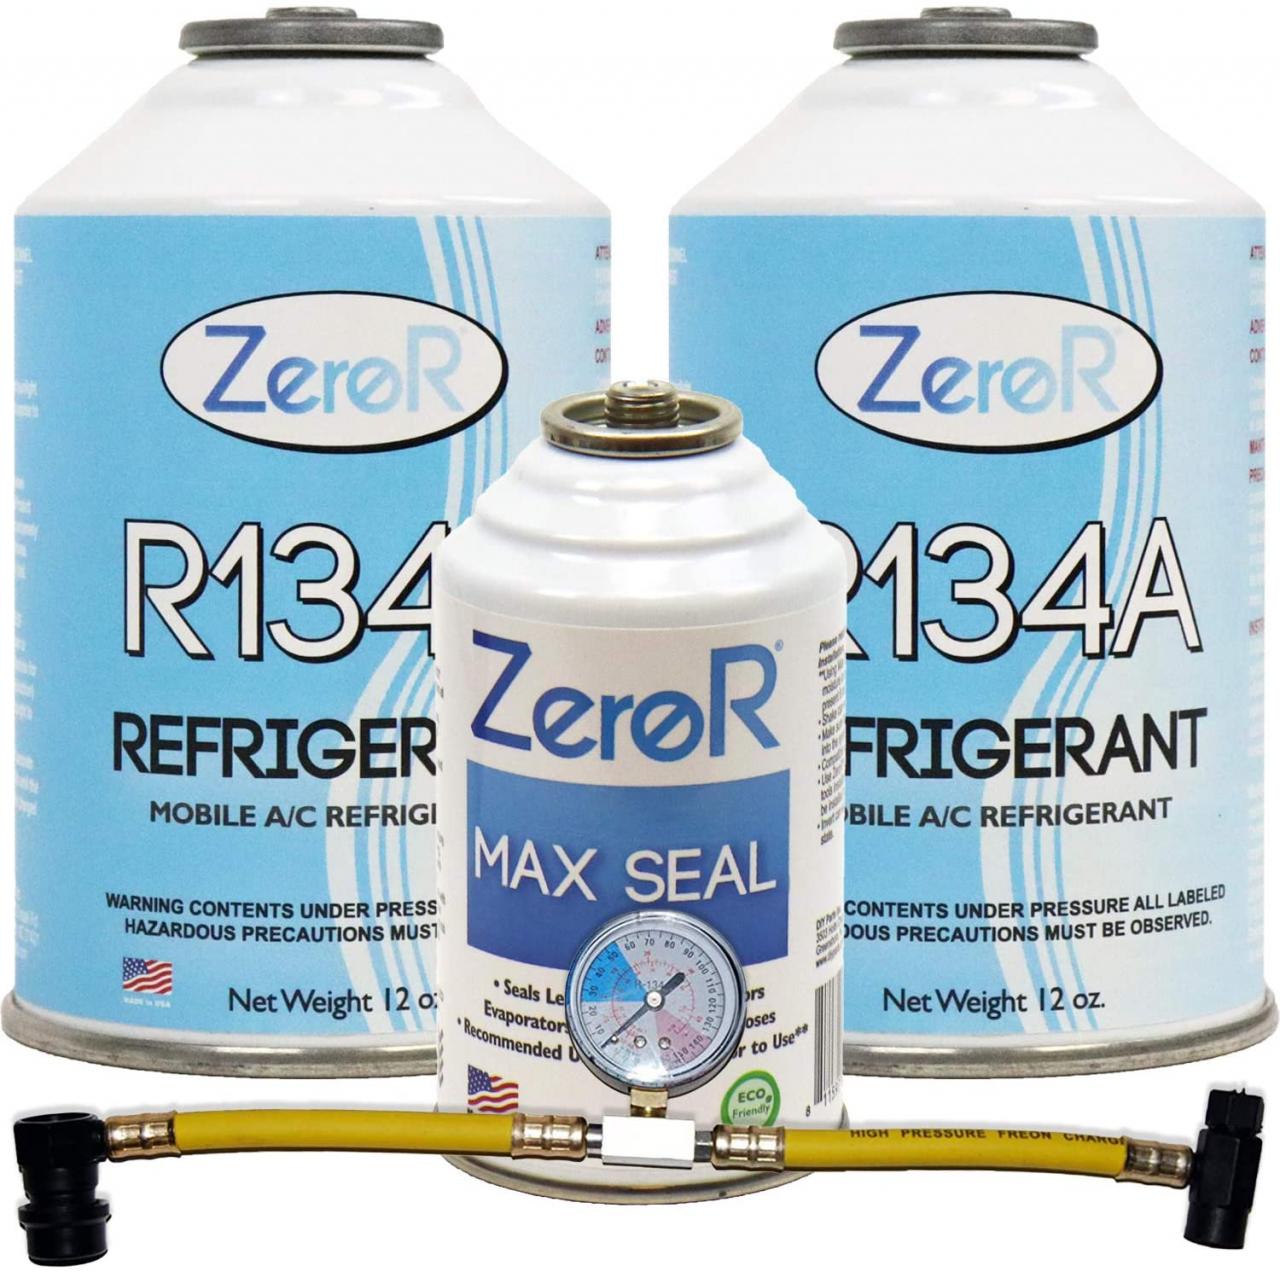 Buy ZeroR Genuine R134a_ Refrigerant_ Quick Seal and AC Recharge Kit, Made  in USA - (4 Items) Online in Indonesia. B08H5W3PVW